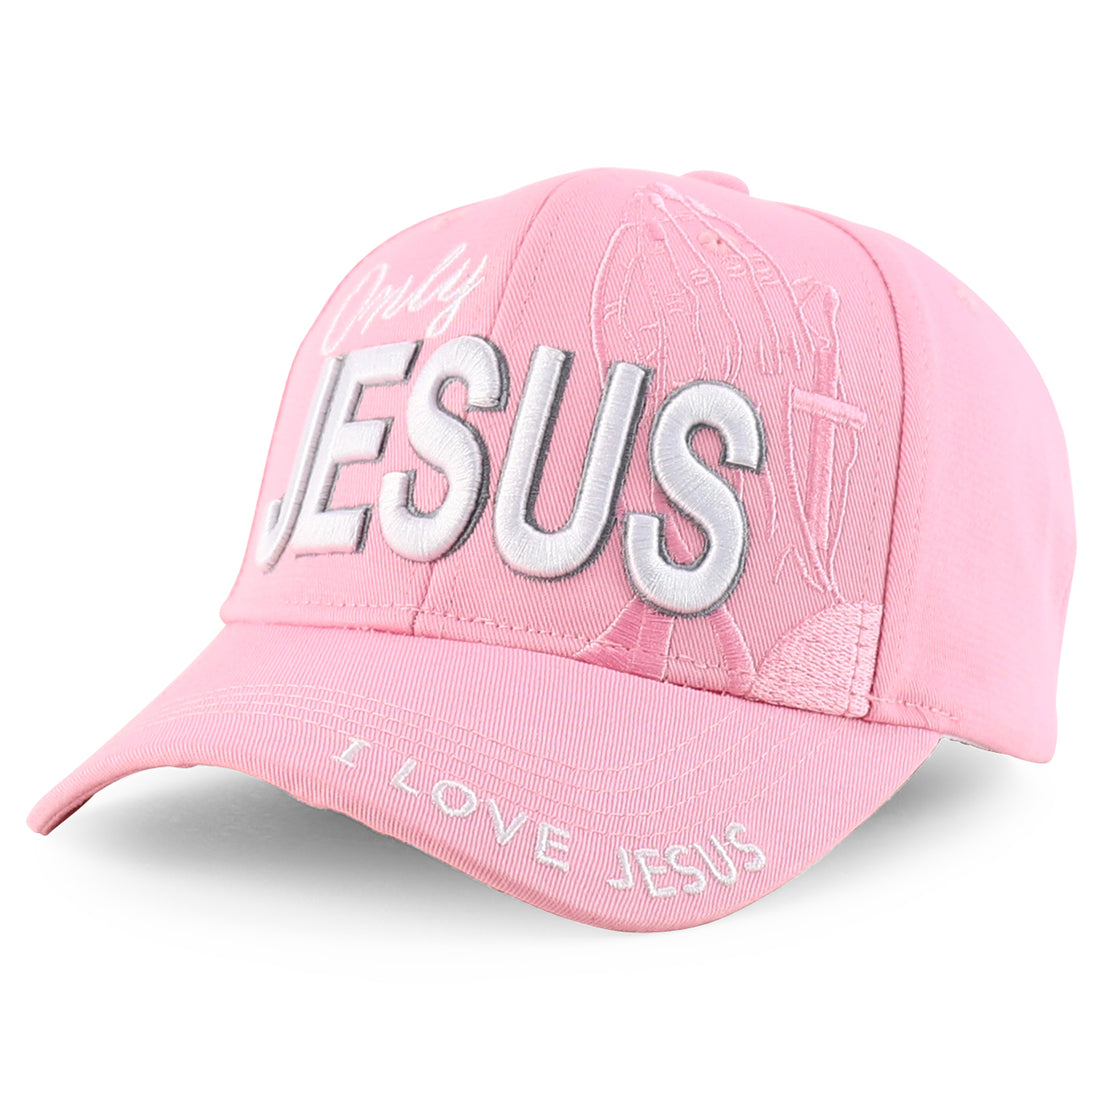 Trendy Apparel Shop Only Jesus Praying Hand Embroidered Christian Ball Cap